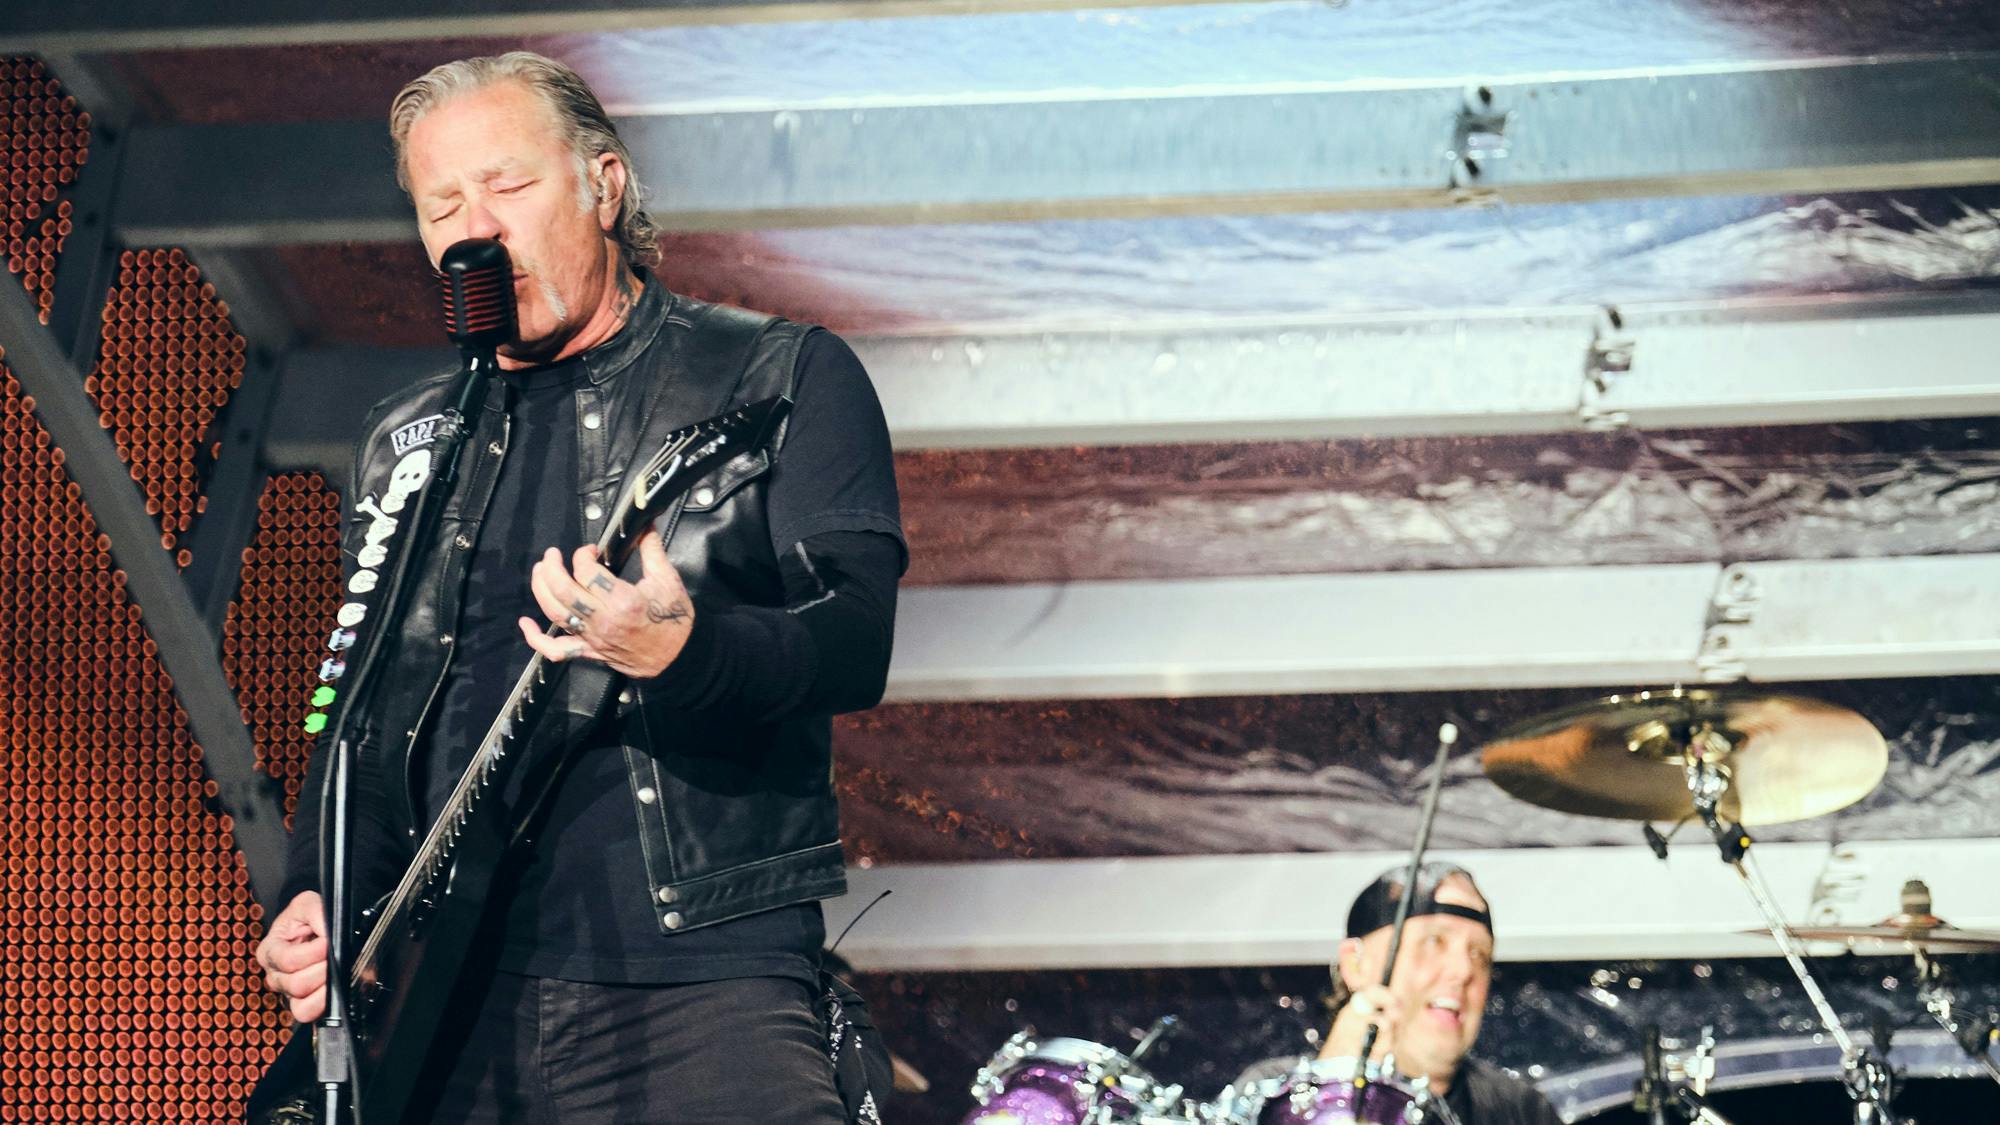 Metallica, KISS And Post Malone Among Highest-Paid Celebrities Of 2020